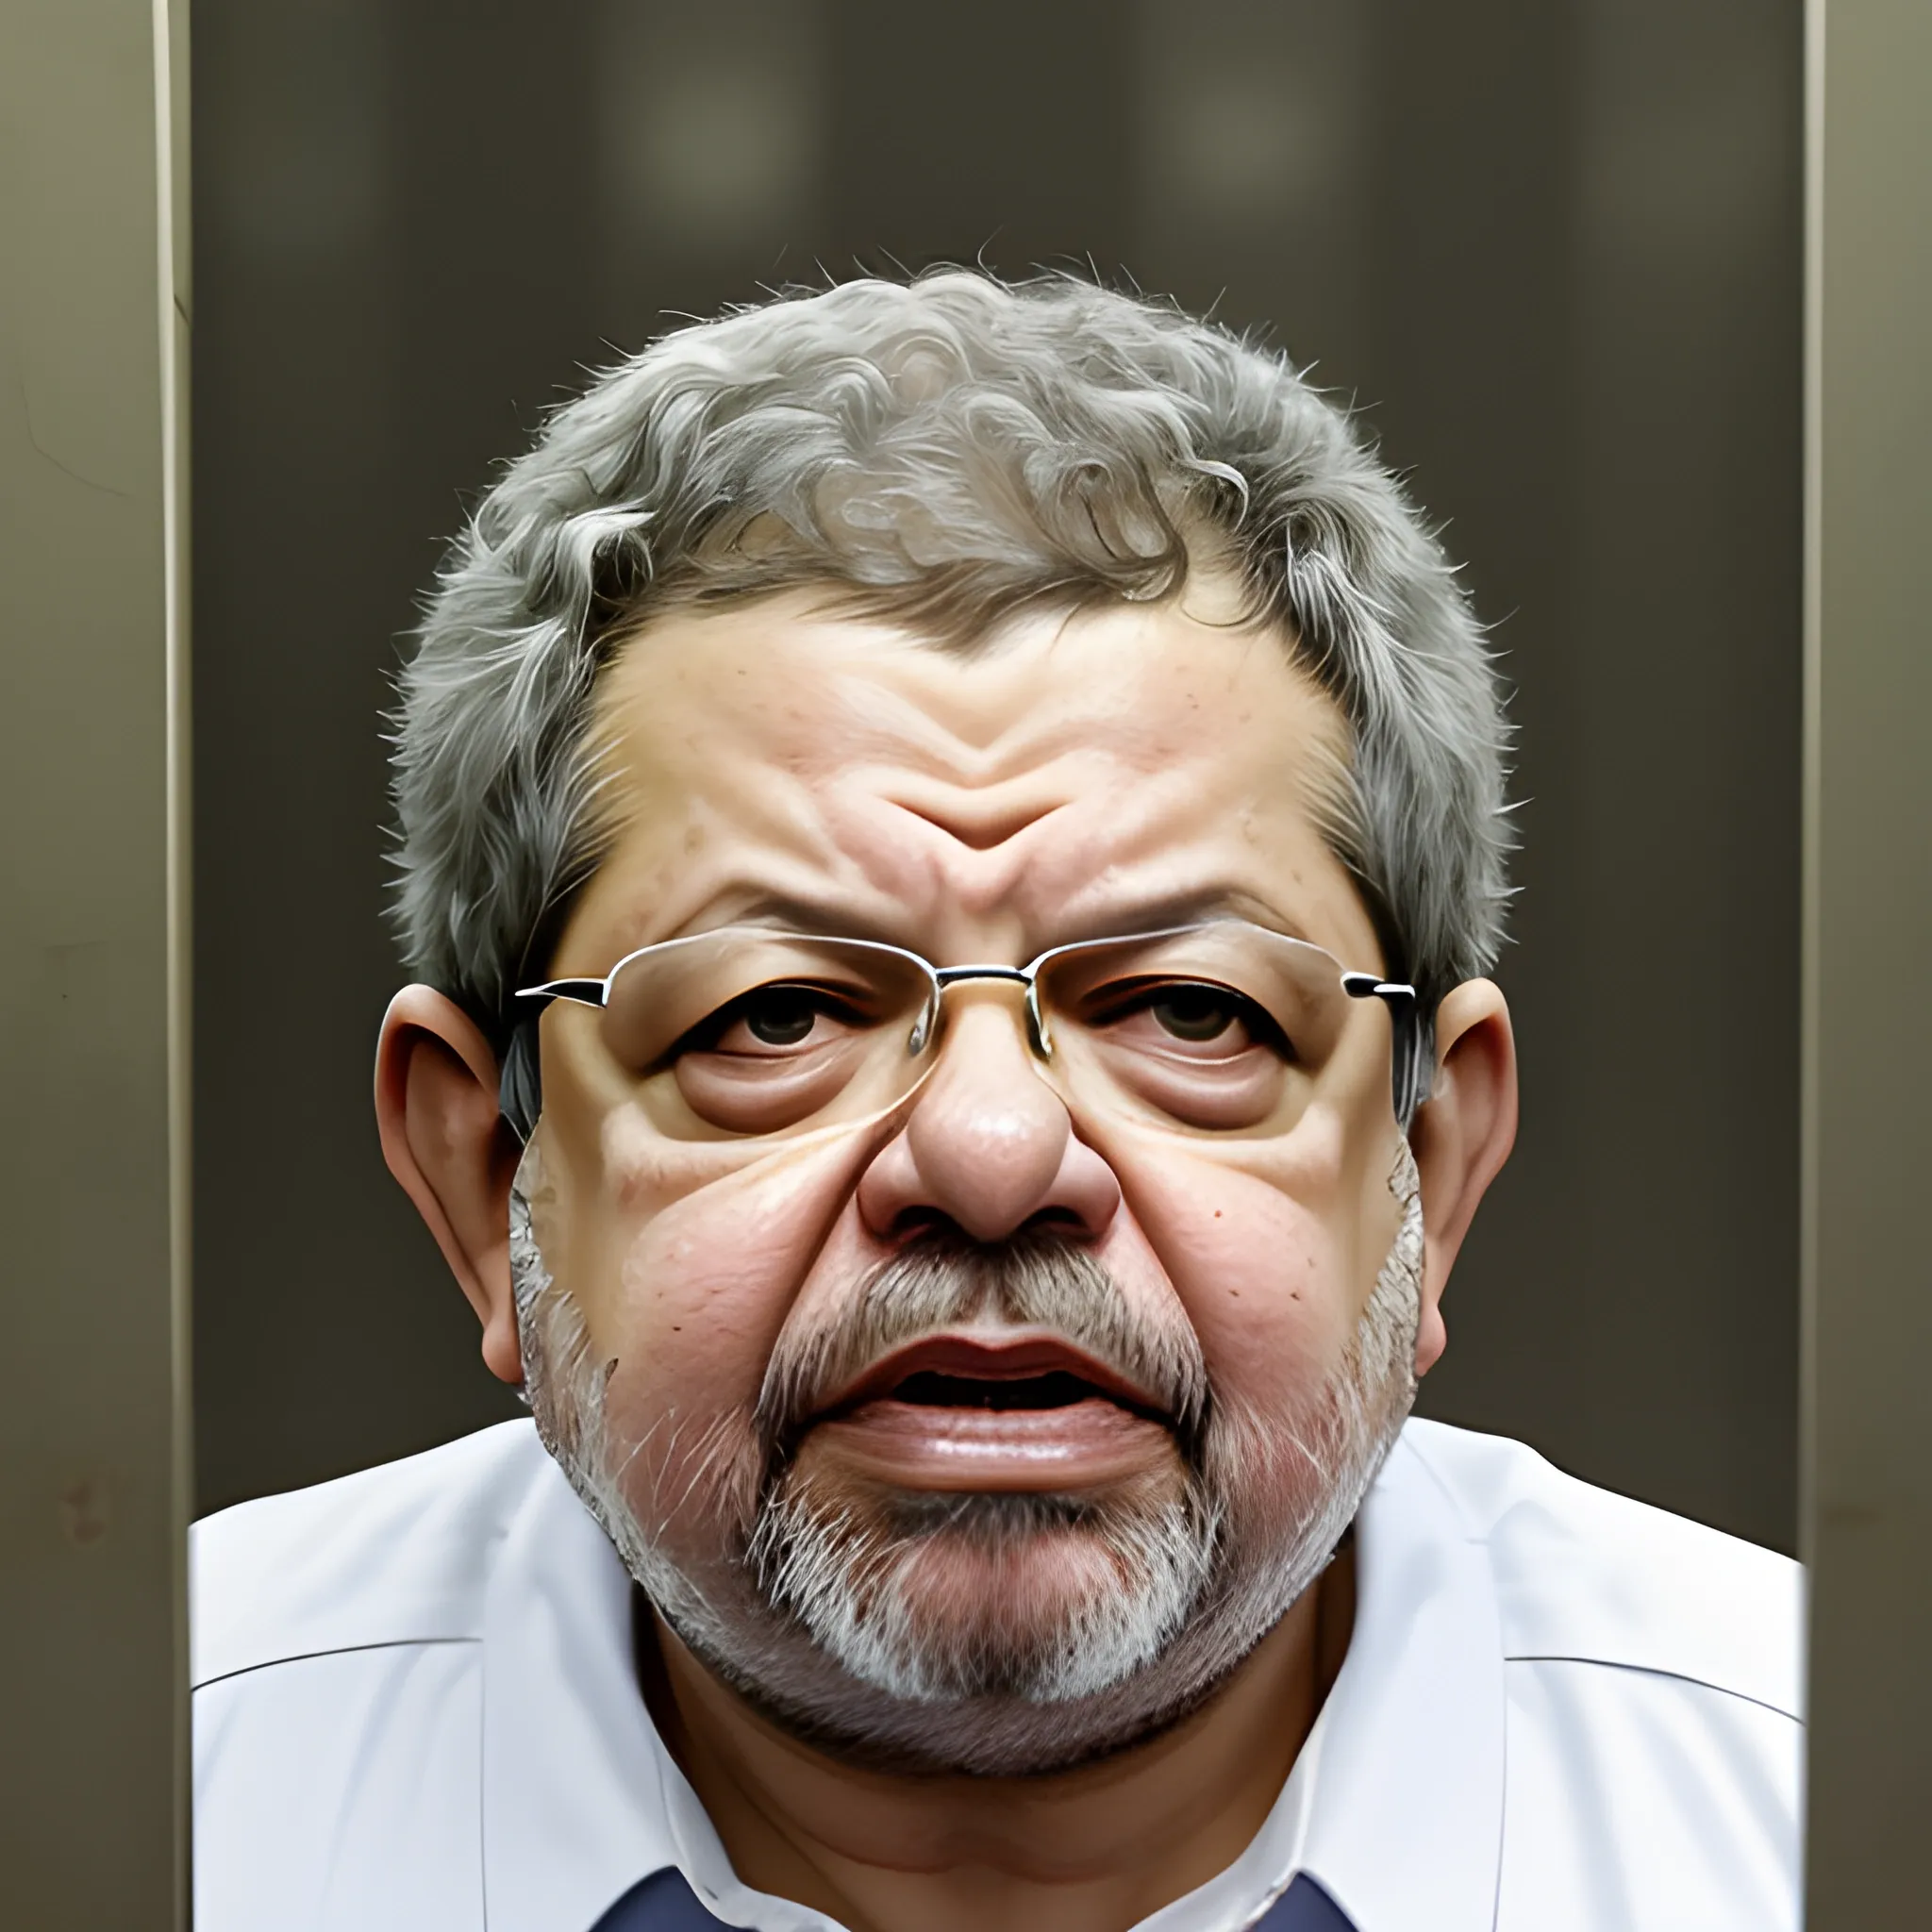 President of Brazil, Luis Inacio Lula da Silva, appearing in a prison cell, behind bars, looking angry and holding the bars, shouting for democracy